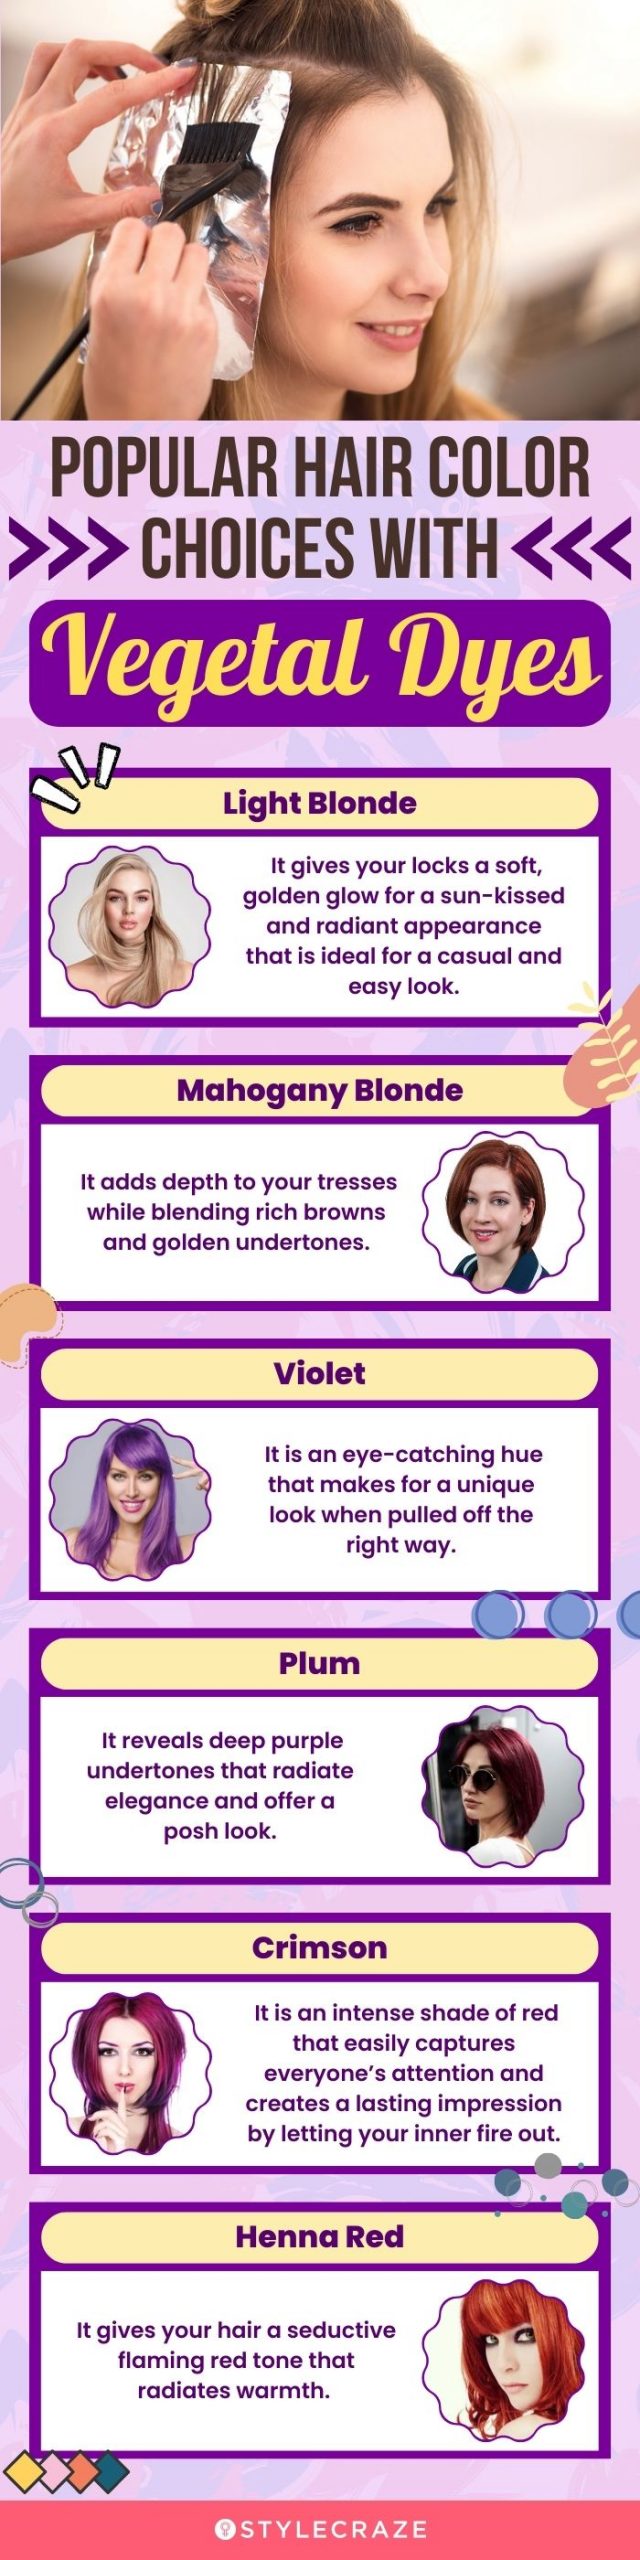 popular hair color choices with vegetal dyes(infographic)